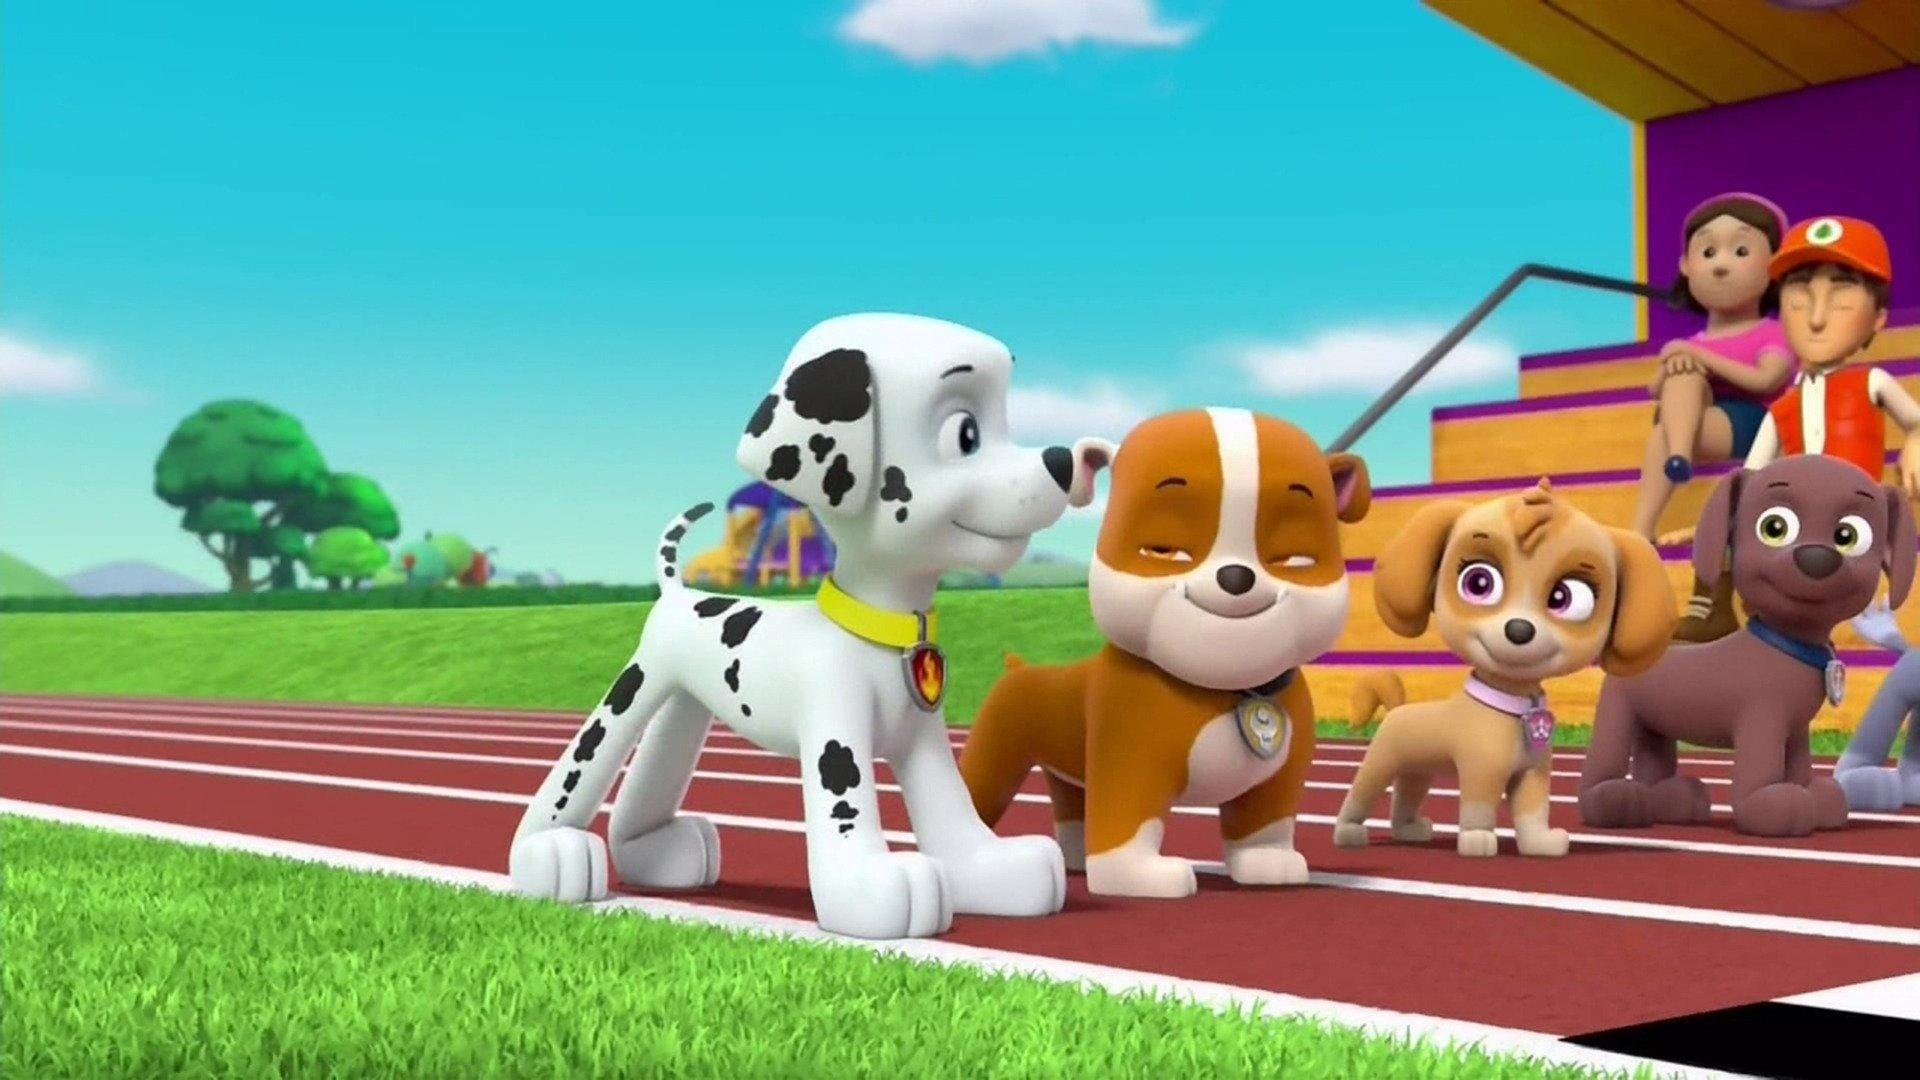 In pups save the soccer game, ryder and the pups are called in to play in a...